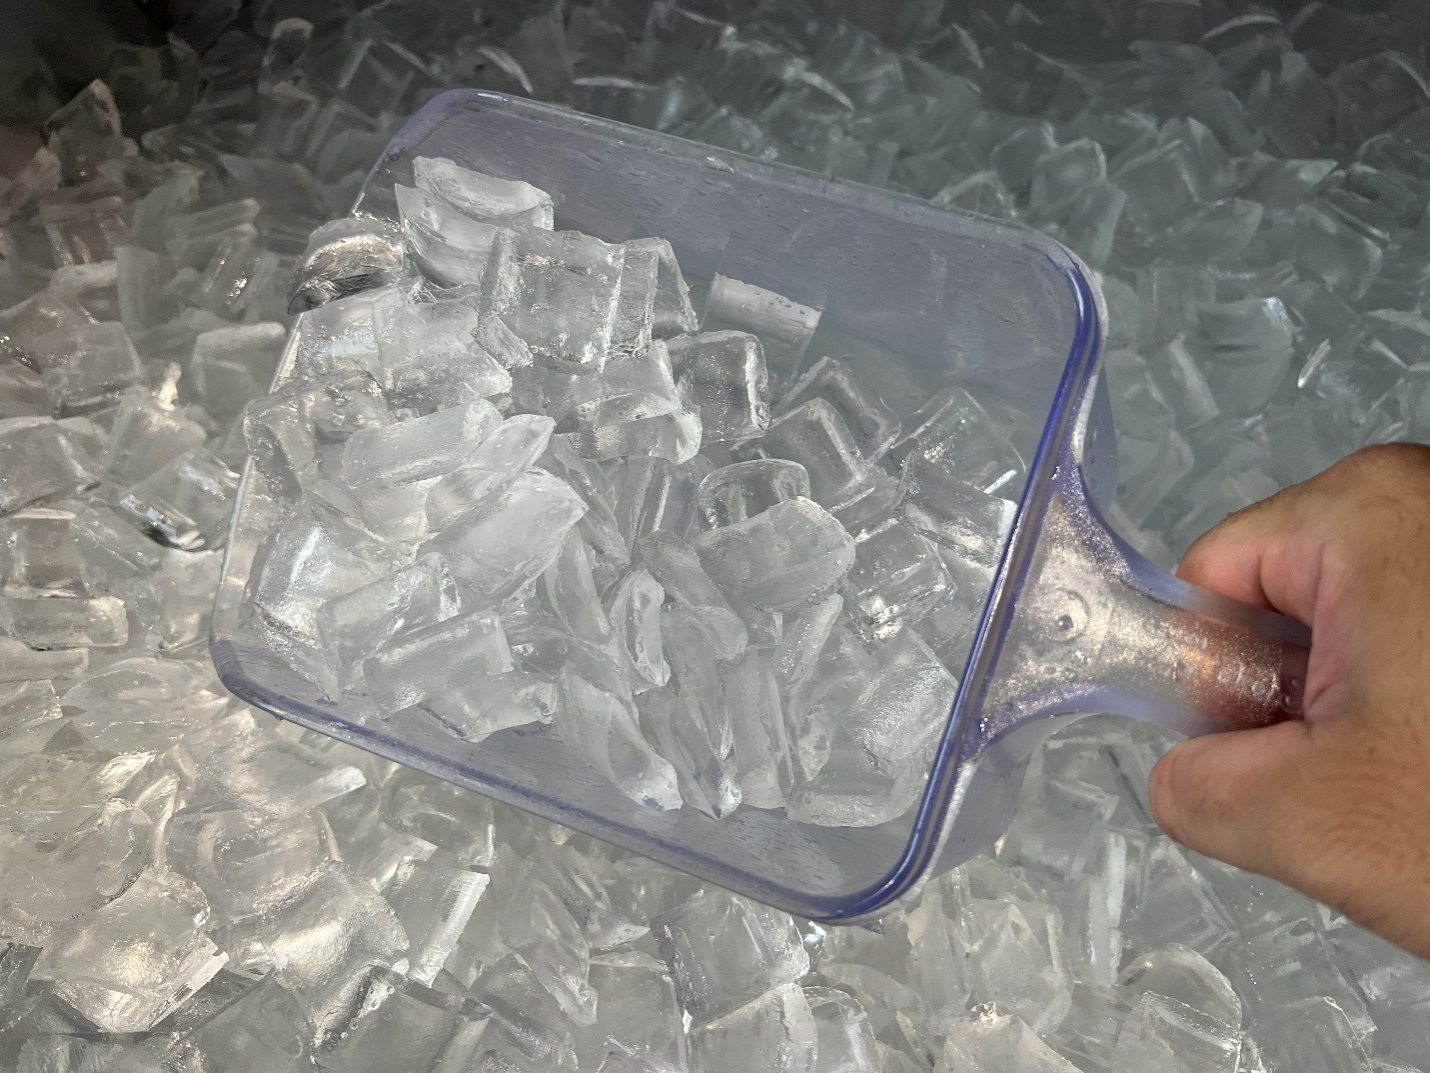 a close-up image of ice cubes being scooped out with a plastic scoop